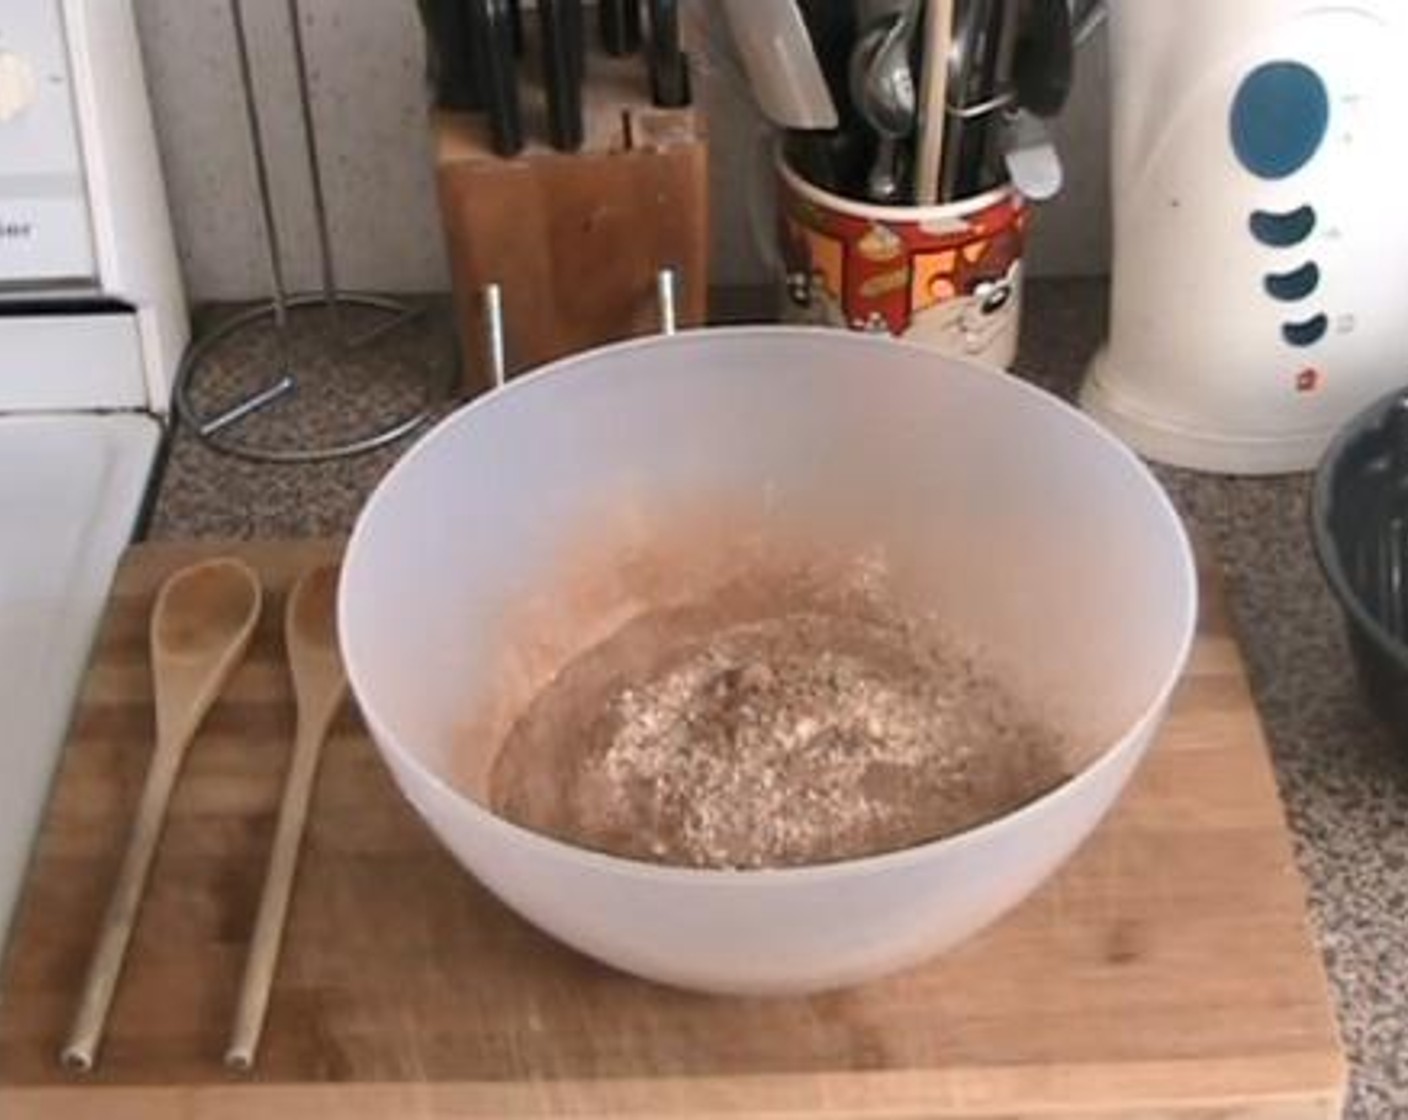 step 1 Into a mixing bowl, add and mix the All-Purpose Flour (1/2 cup), Self-Rising Flour (1/2 cup), and Unsweetened Cocoa Powder (1/2 cup).